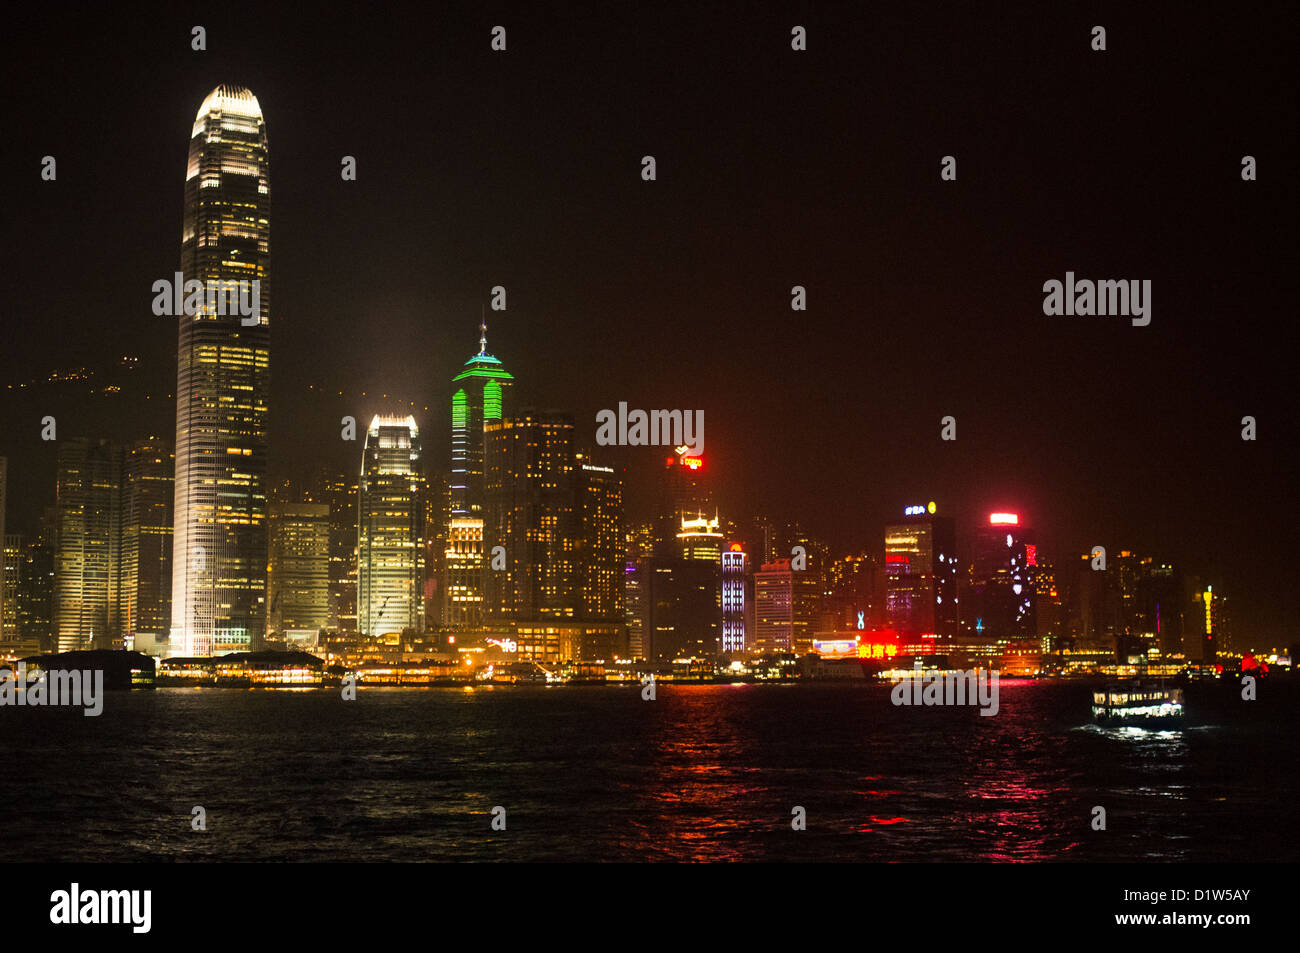 city skyline of victoria harbour at night, Hong Kong, China. Stock Photo